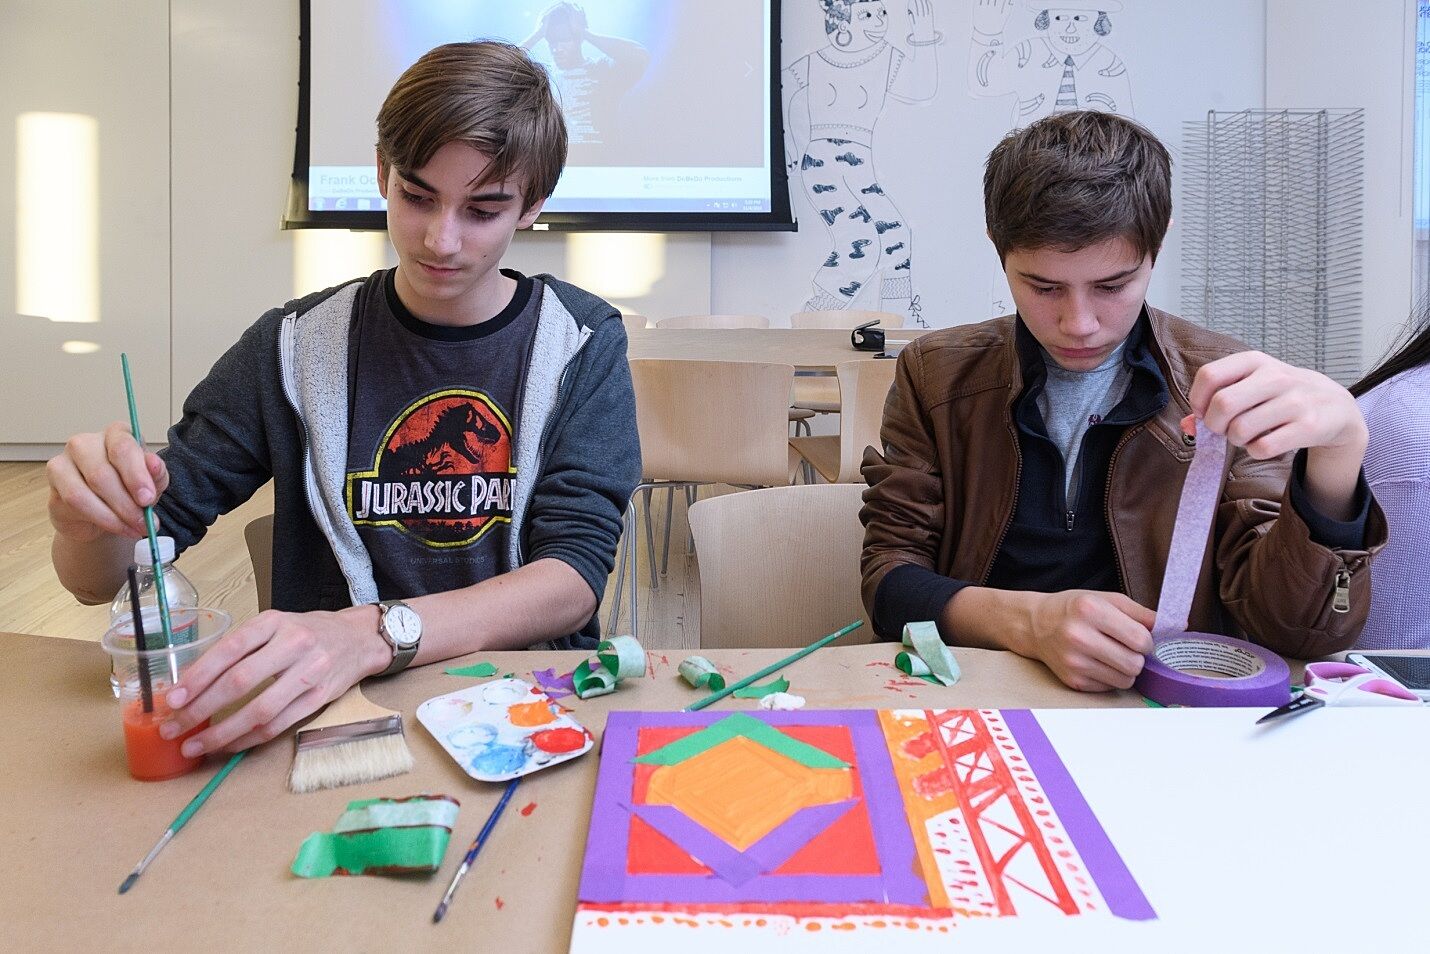 Two students mix paint and work on a collaborative art project.